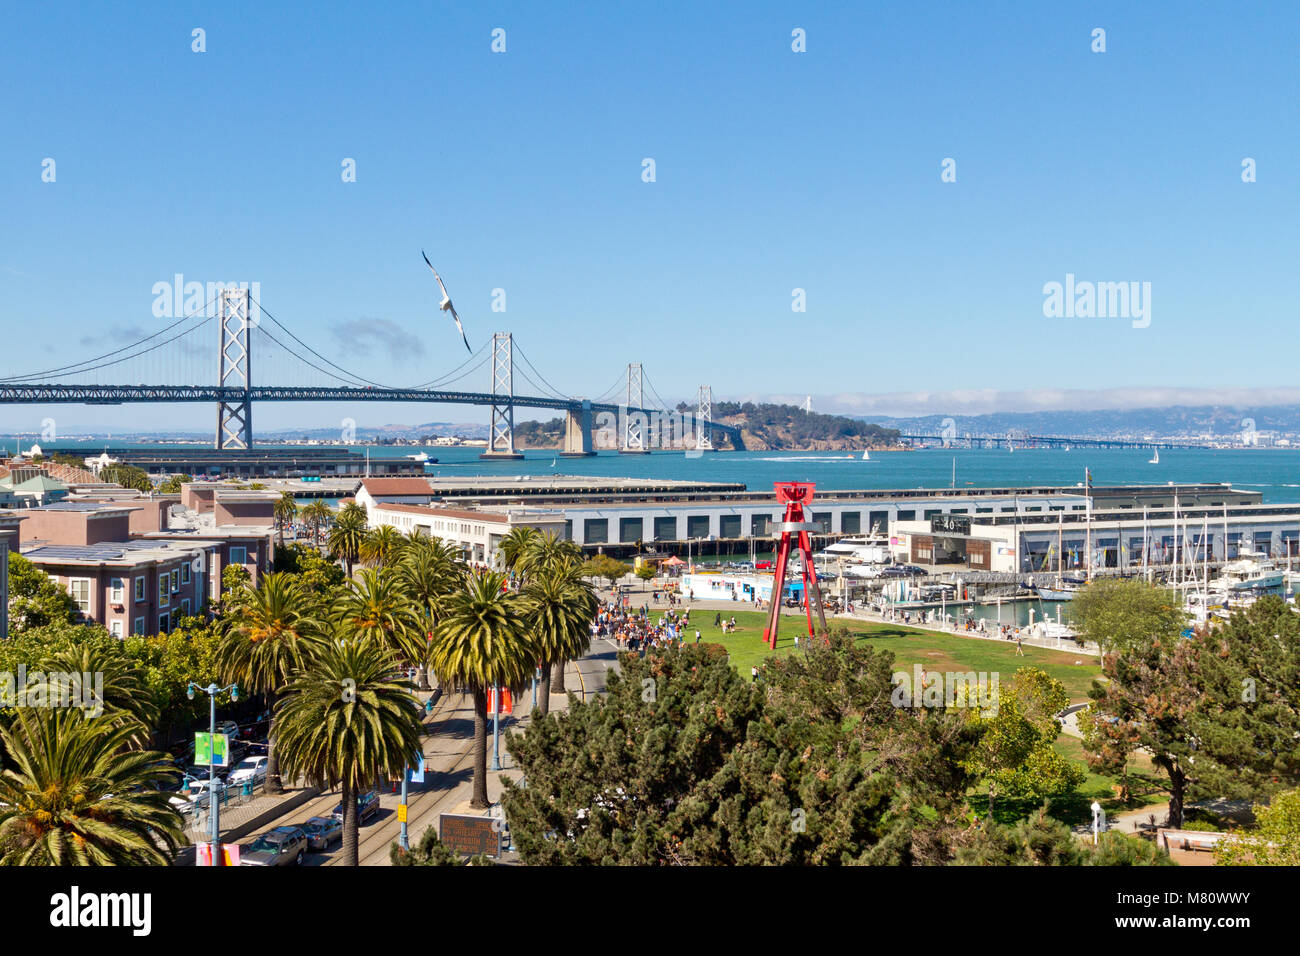 An elevated view of the Embarcadero in San Francisco, CA with the Bay Bridge and Treasure Island in the background. Stock Photo